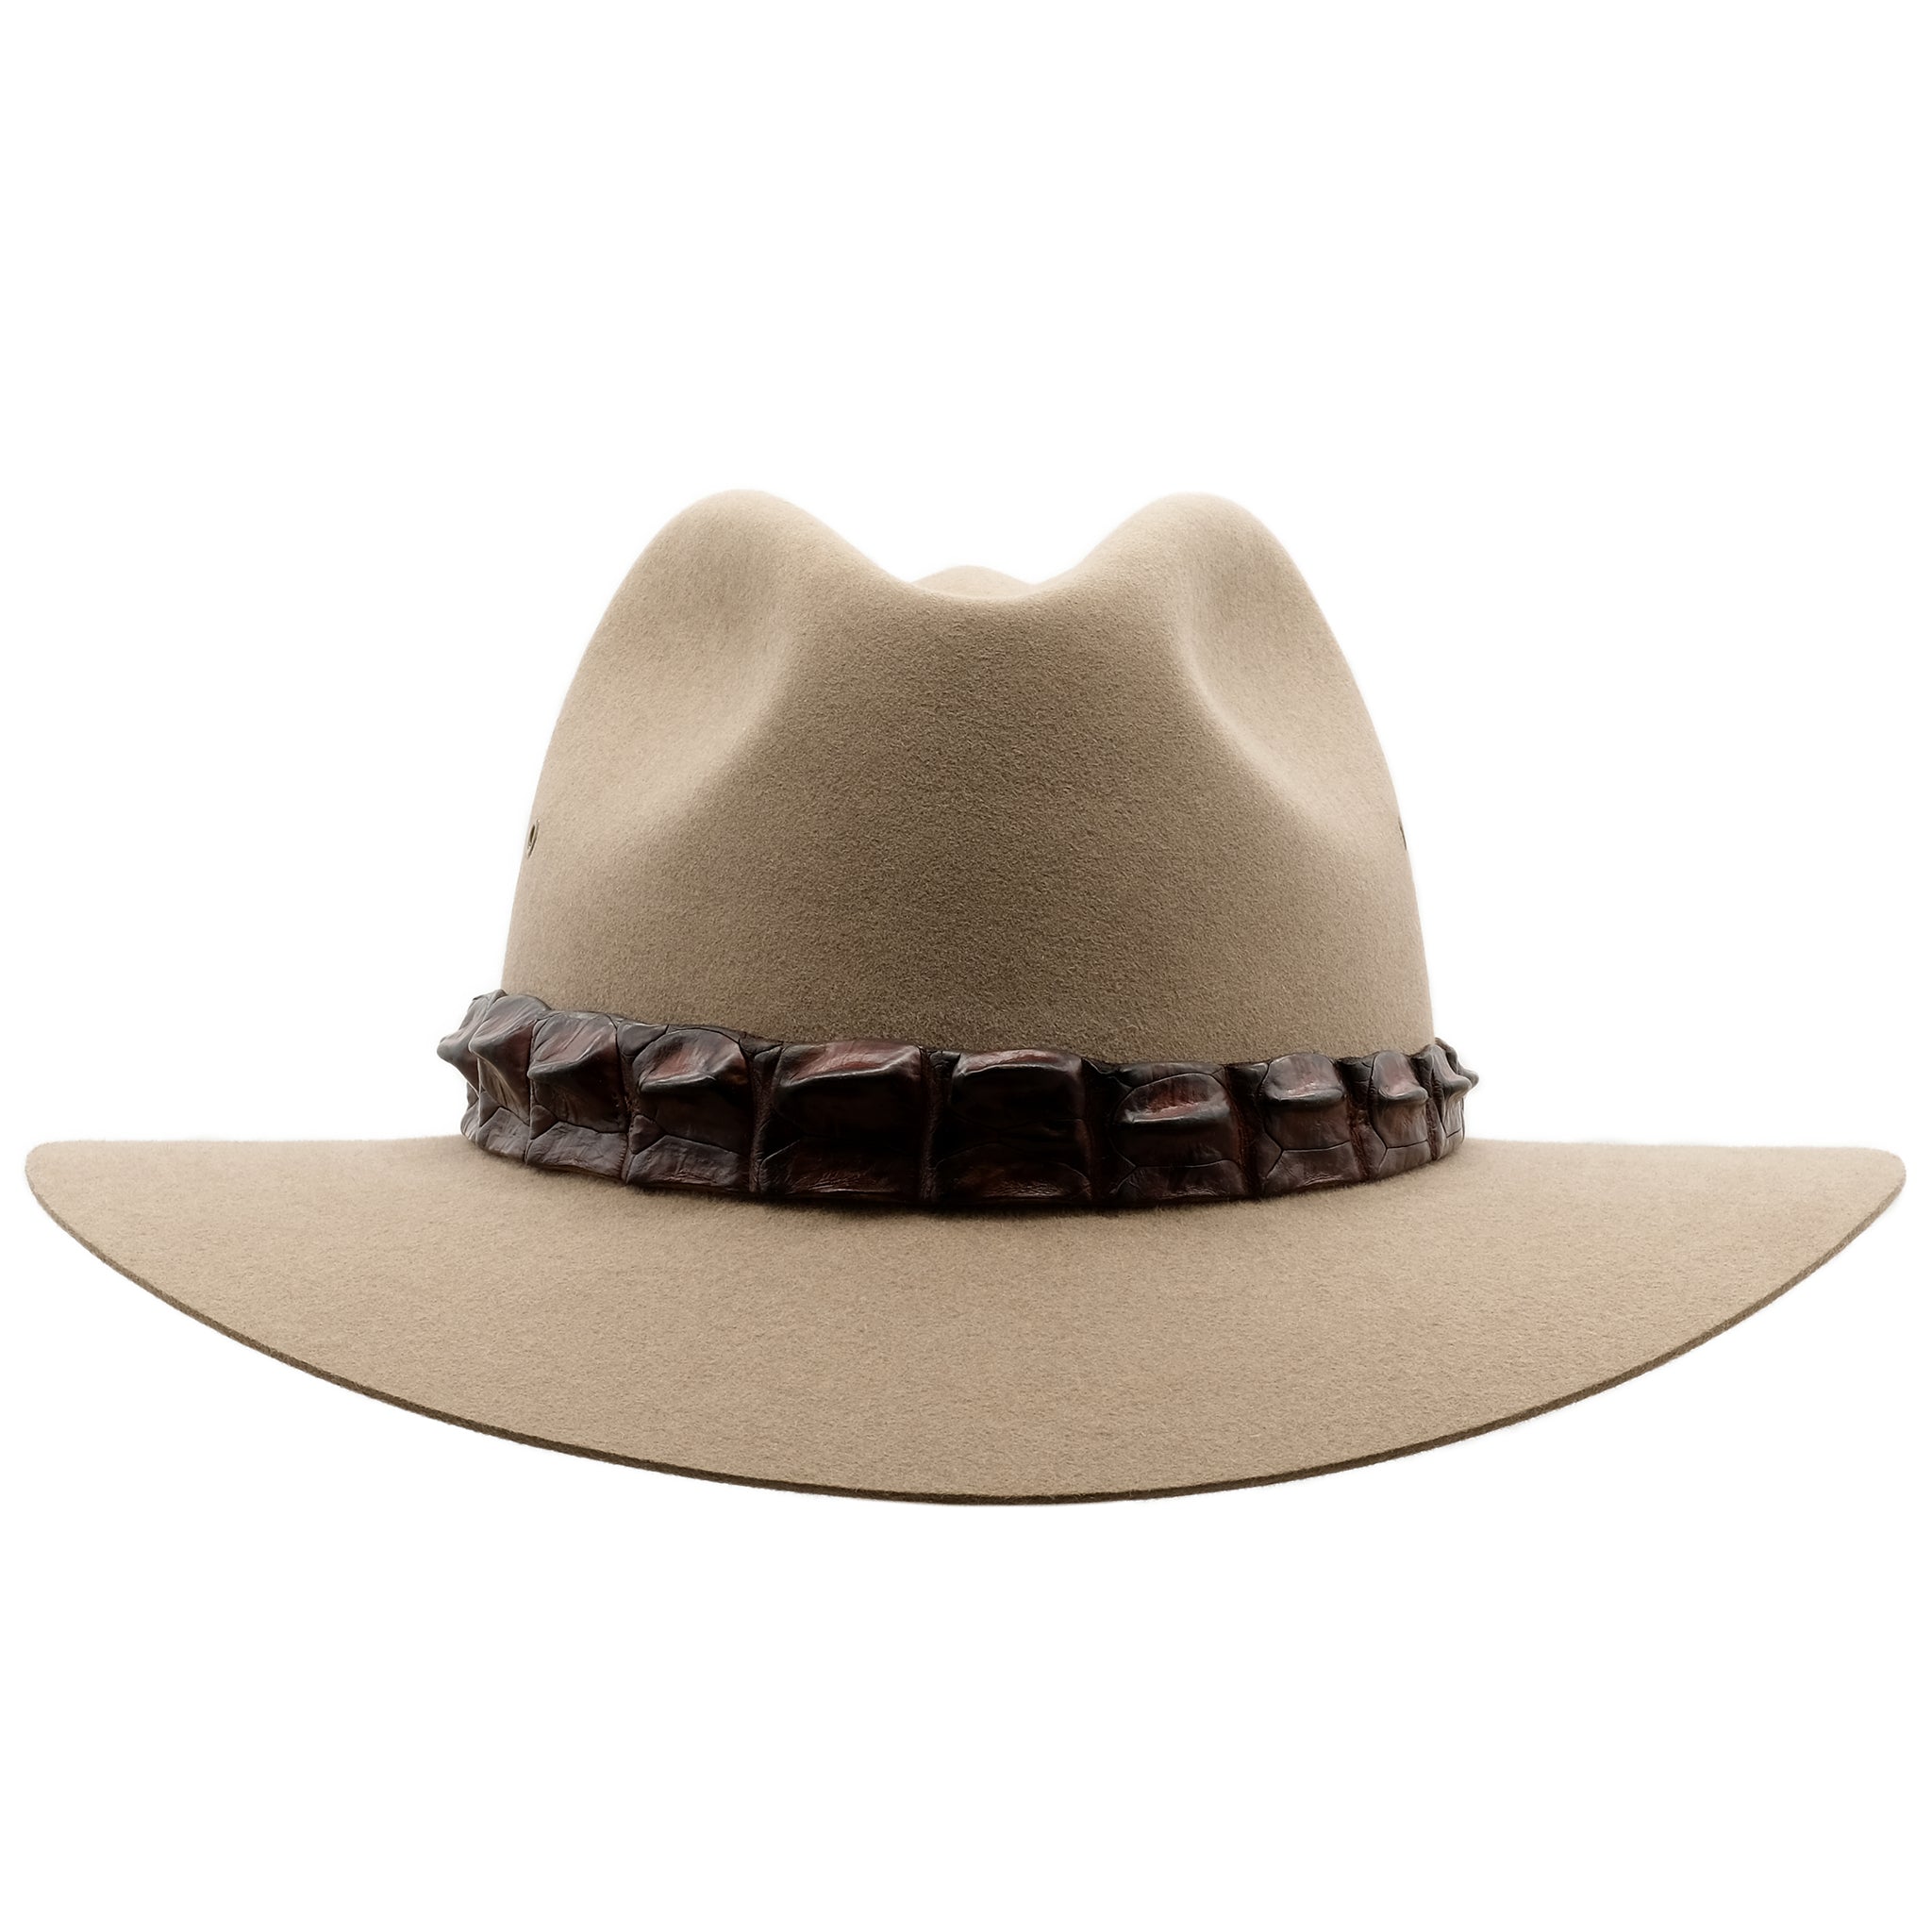 Front view of the Bran coloured Akubra Coolabah hat